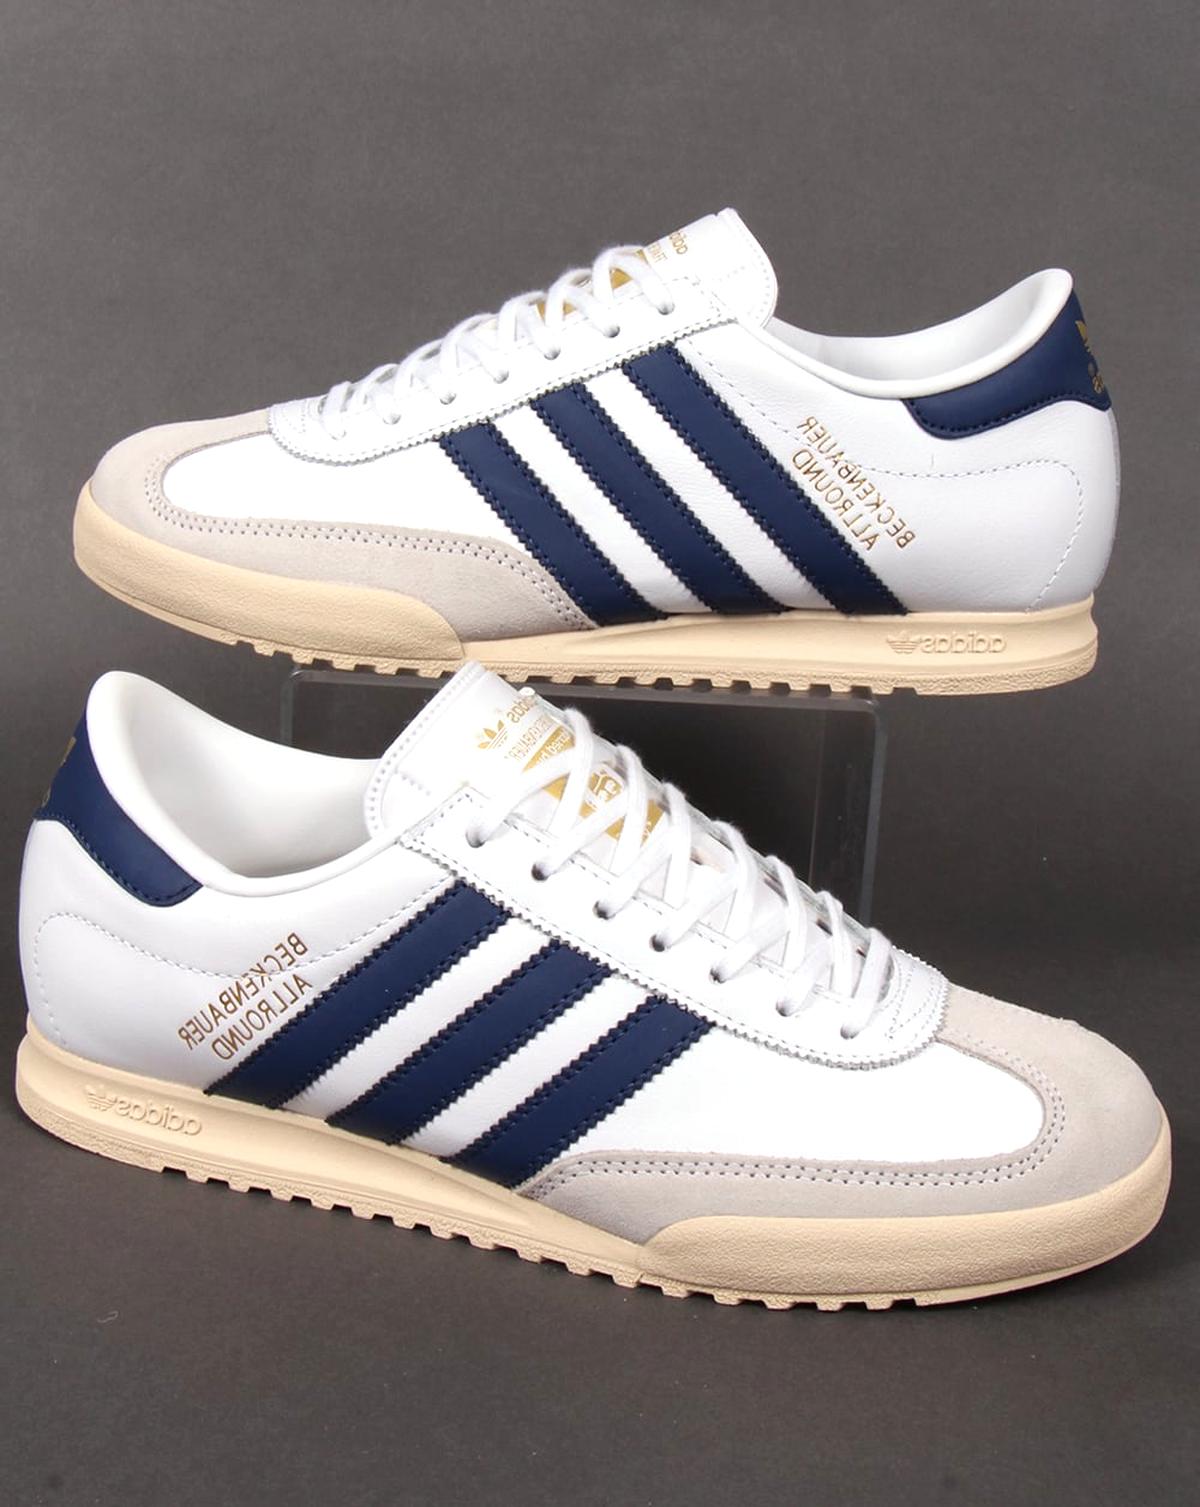 Adidas Beckenbauer Trainers for sale in UK | 62 used Adidas Beckenbauer ...